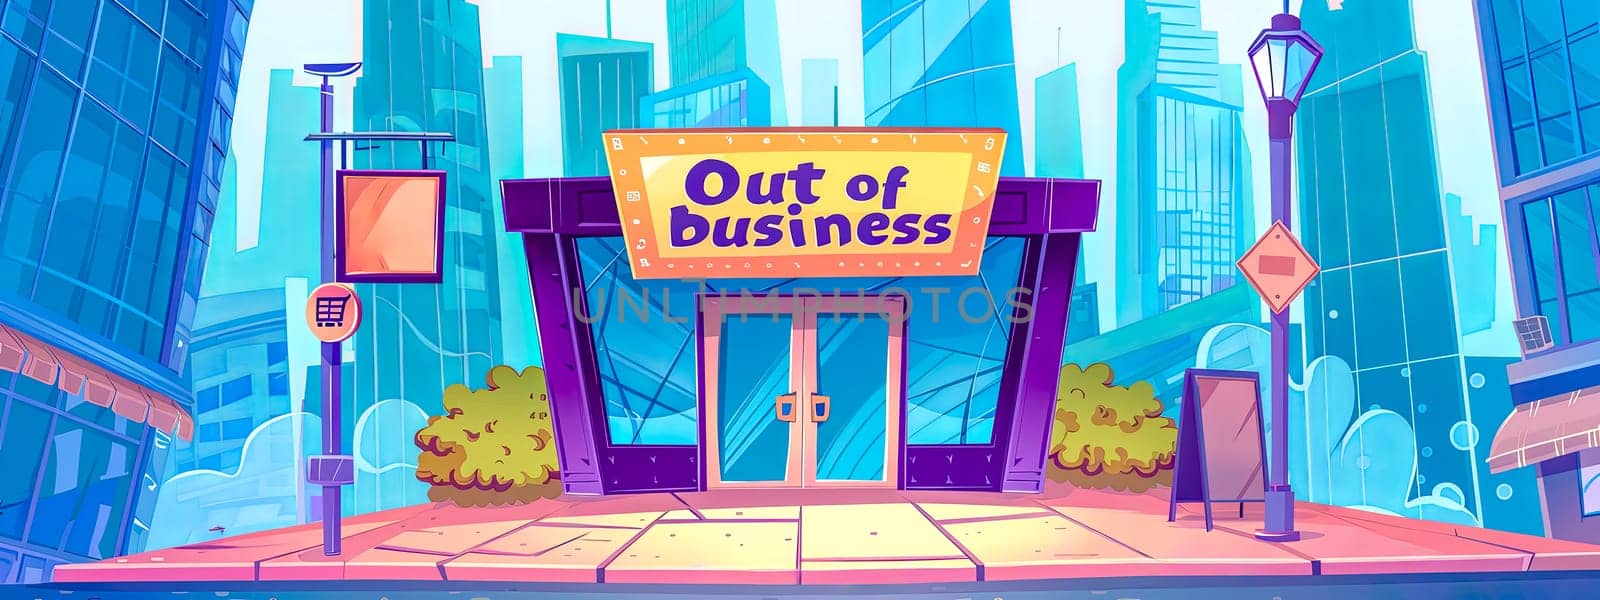 Cartoon storefront closed - out of business concept by Edophoto